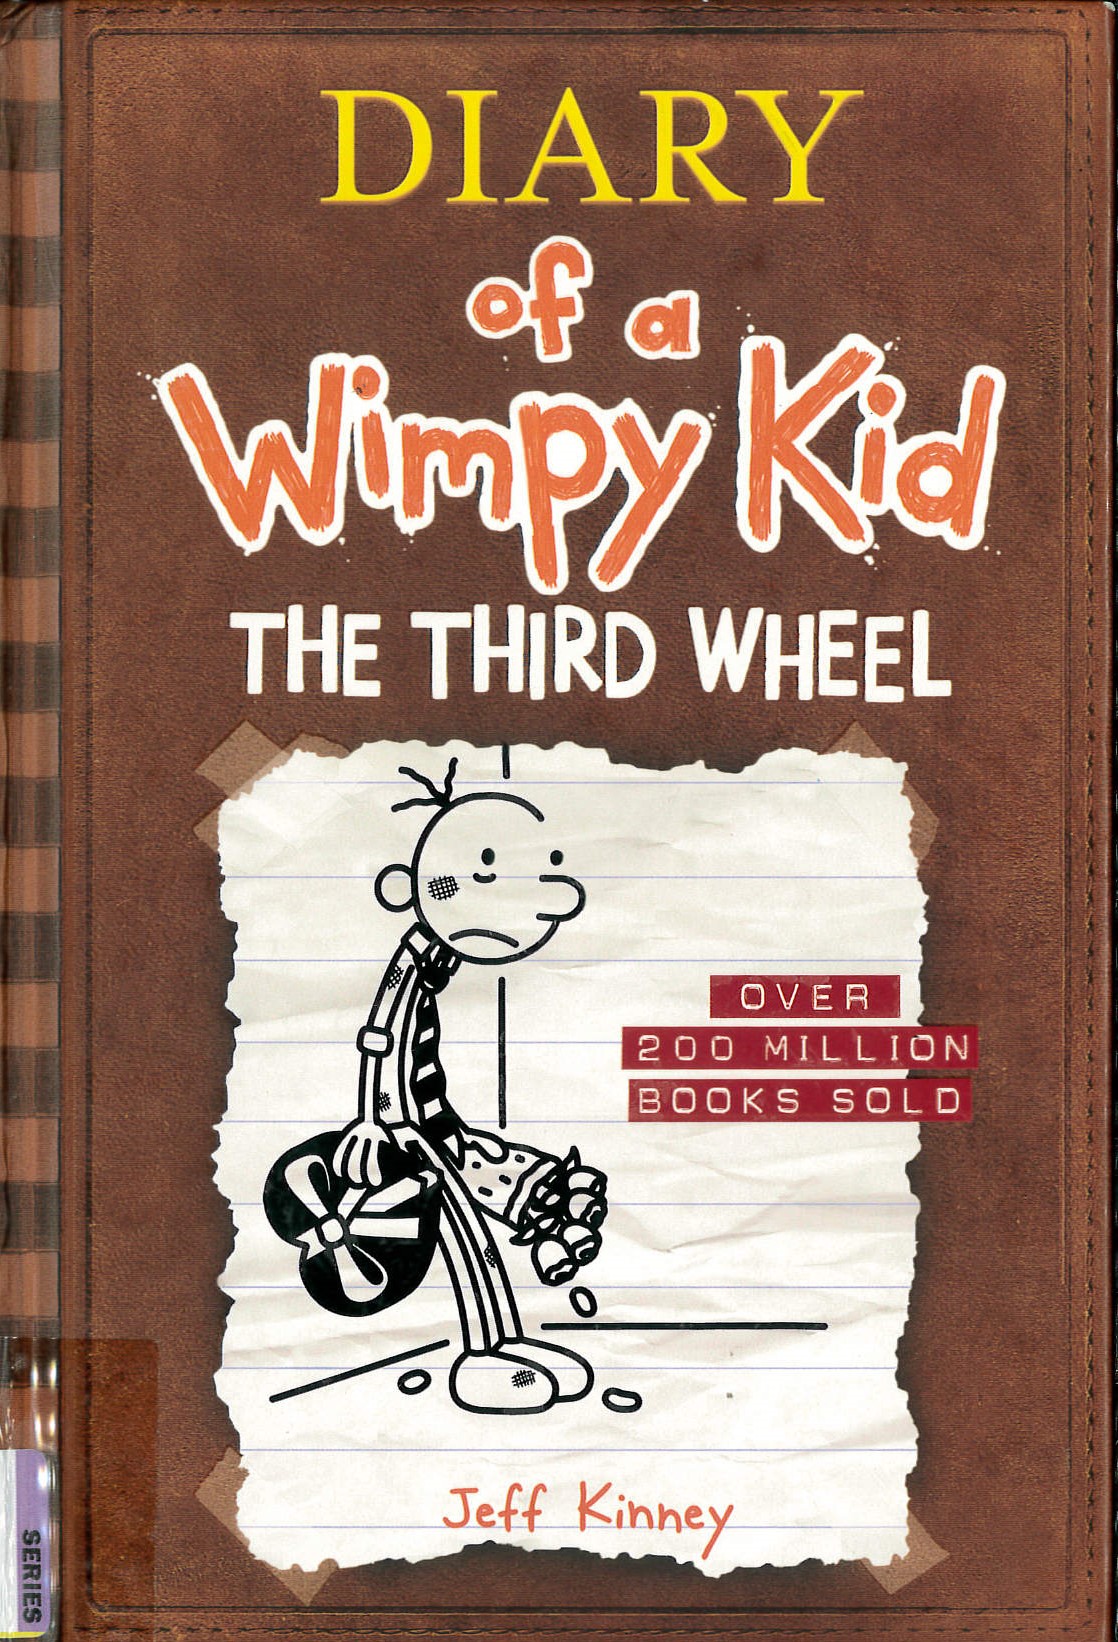 Diary of a wimpy kid(7) : The third wheel /